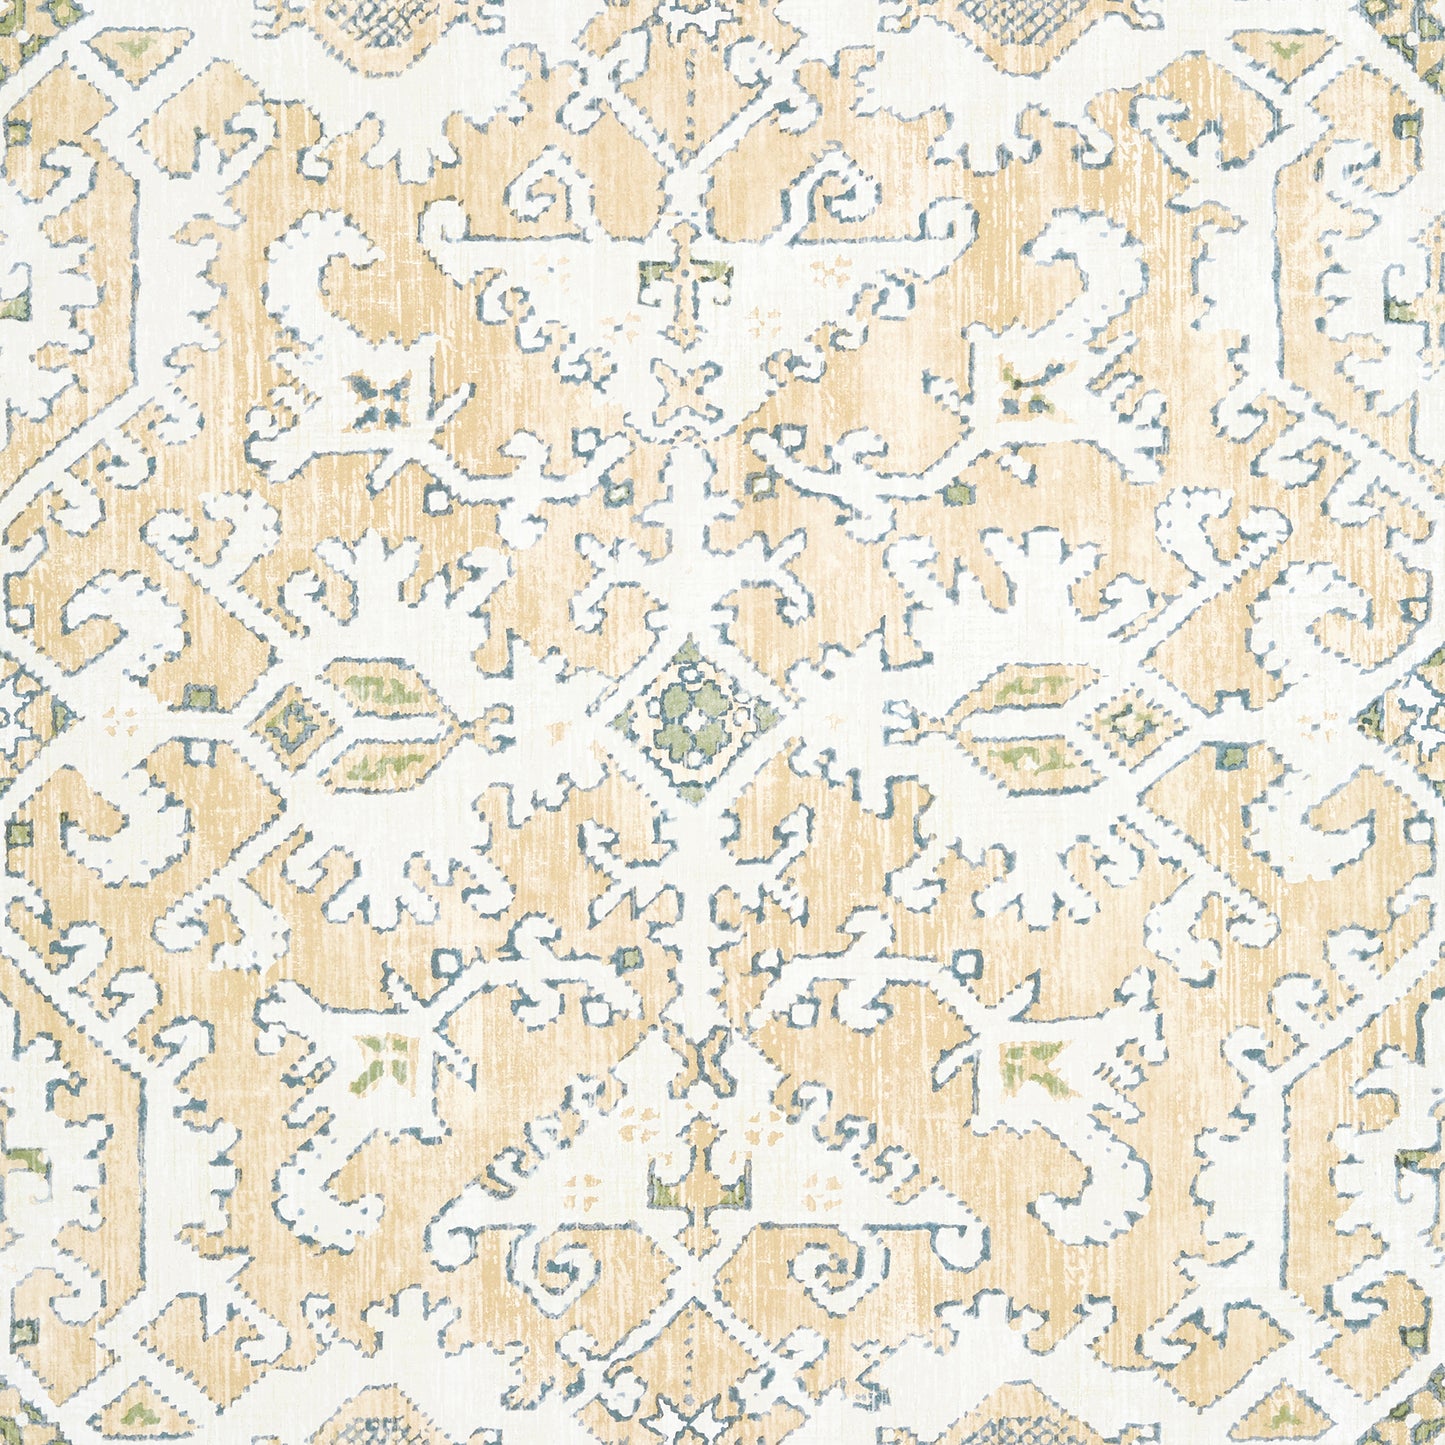 Purchase  Ann French Wallpaper Pattern number AT24555 pattern name  Pontorma